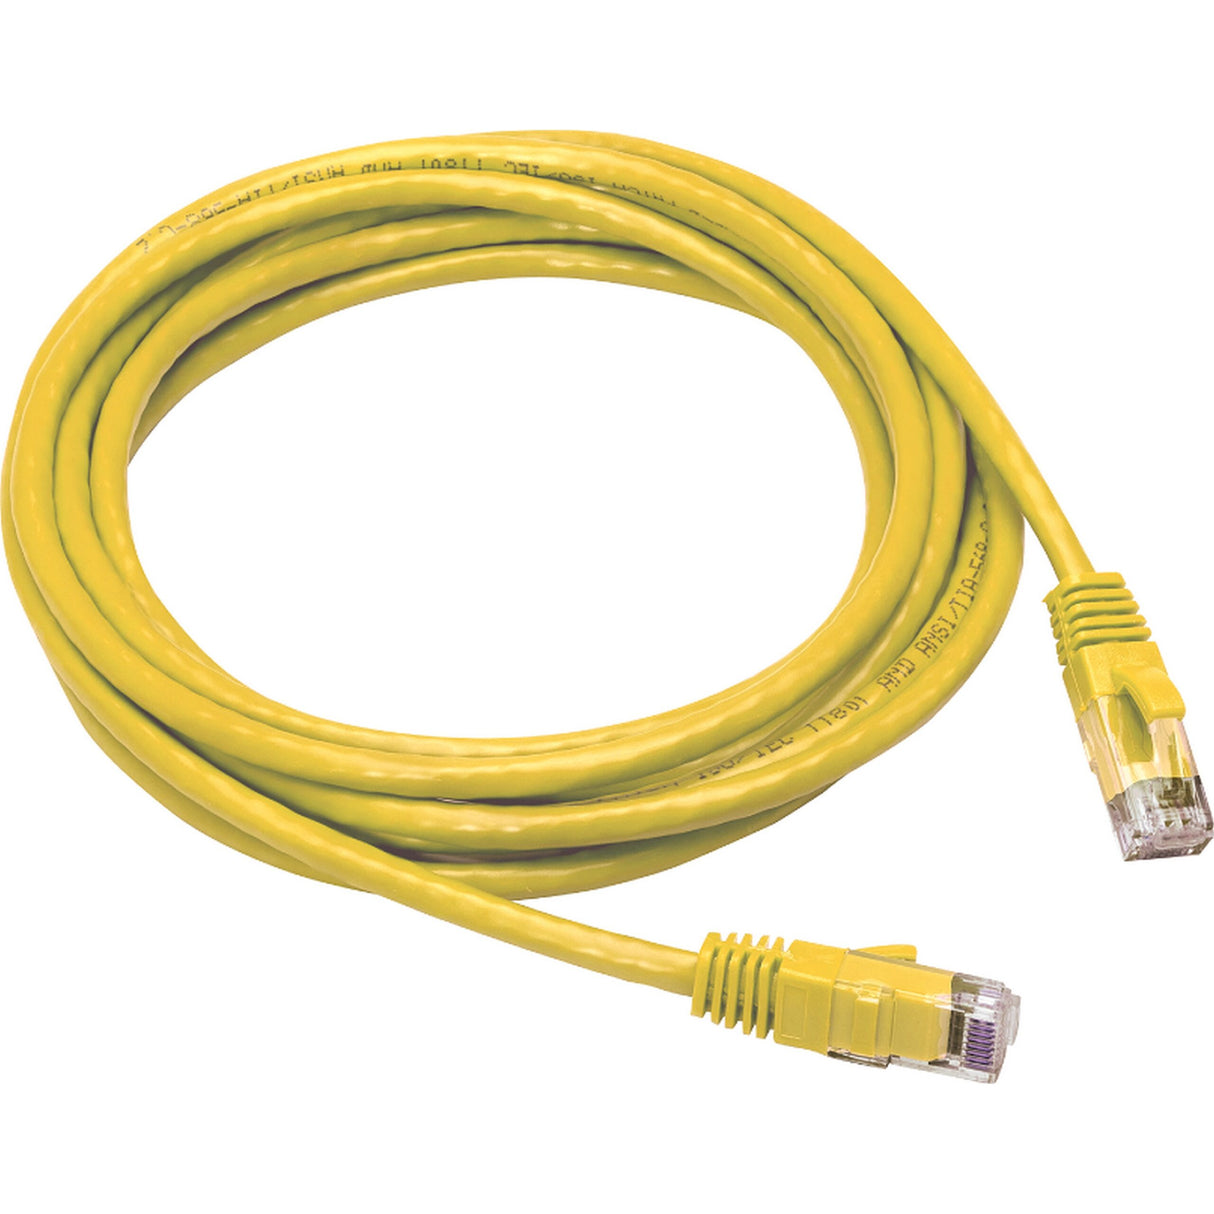 Liberty AV 152G5U4005 Category 5E True 24AWG Patch Cable, 5 Foot, Yellow